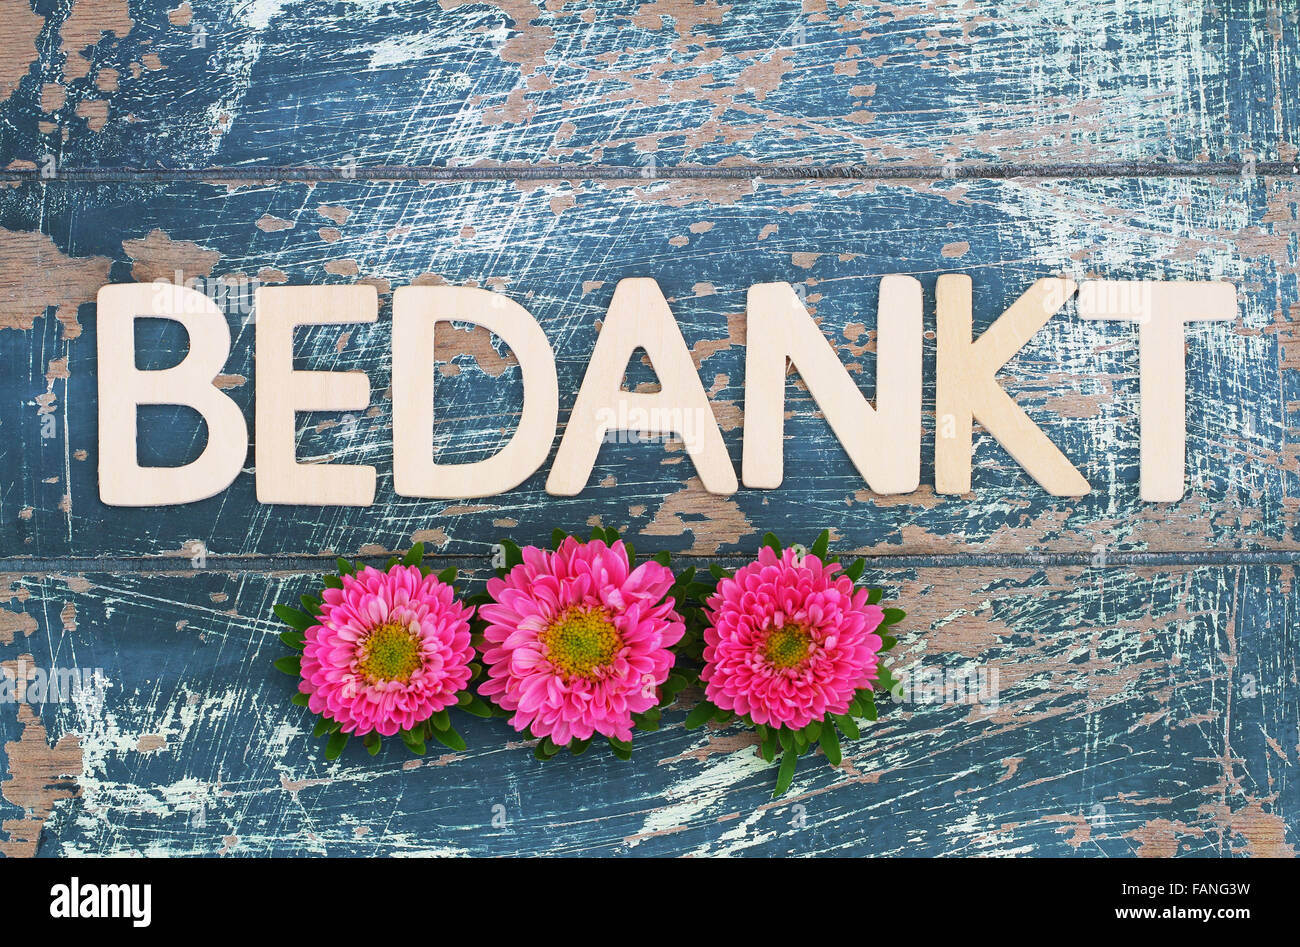 veelbelovend capaciteit Architectuur Bedankt (thank you in Dutch) written with wooden letters on rustic surface  and pink daisies Stock Photo - Alamy